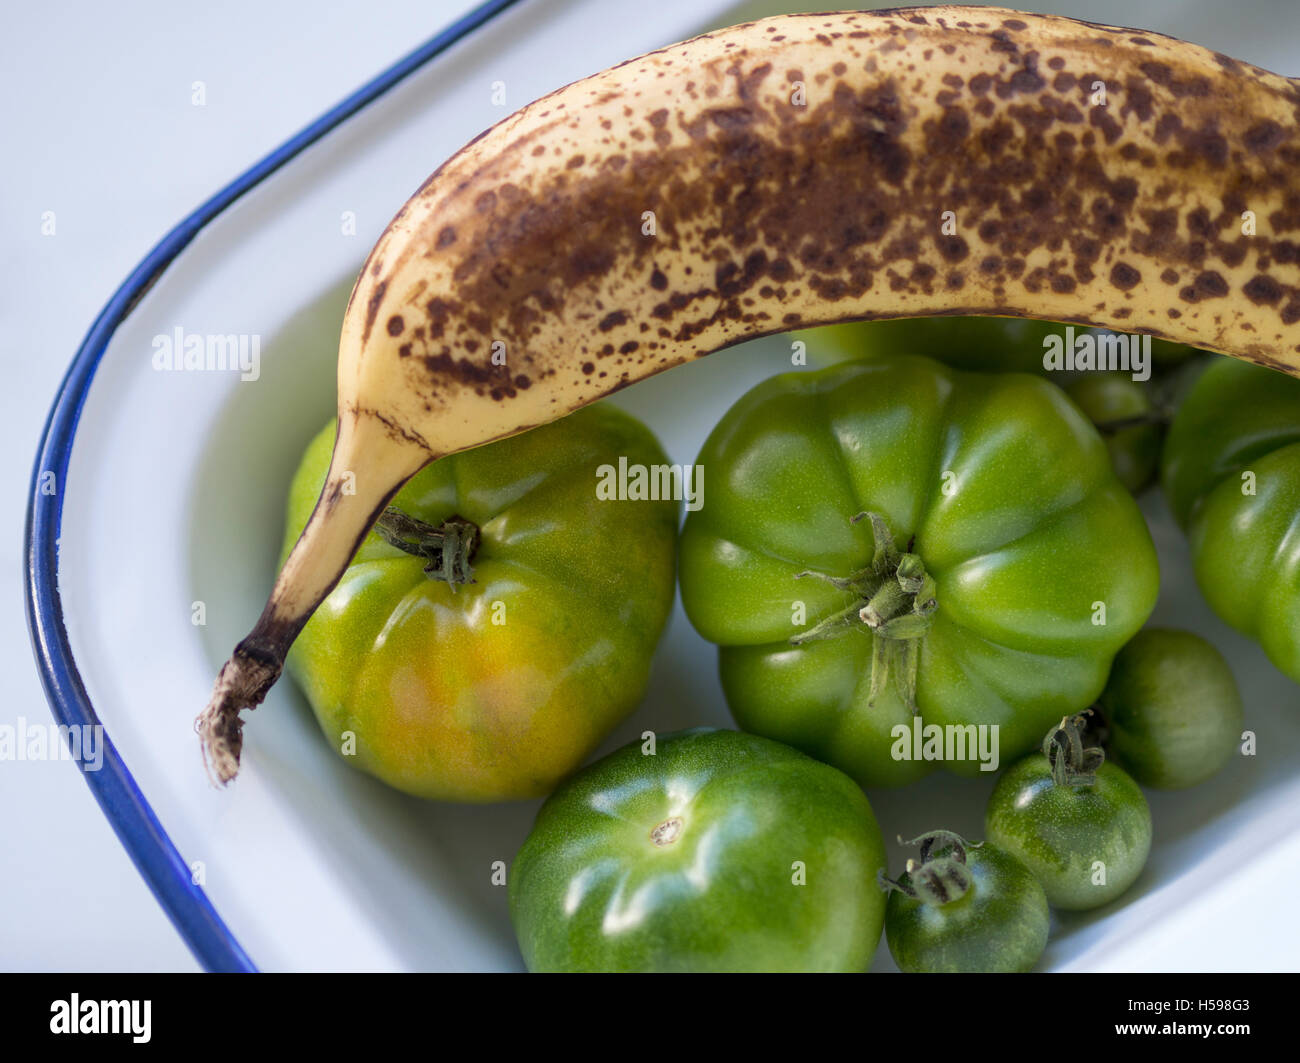 A ripe banana being uses to ripen a bowl of green tomatoes. Stock Photo